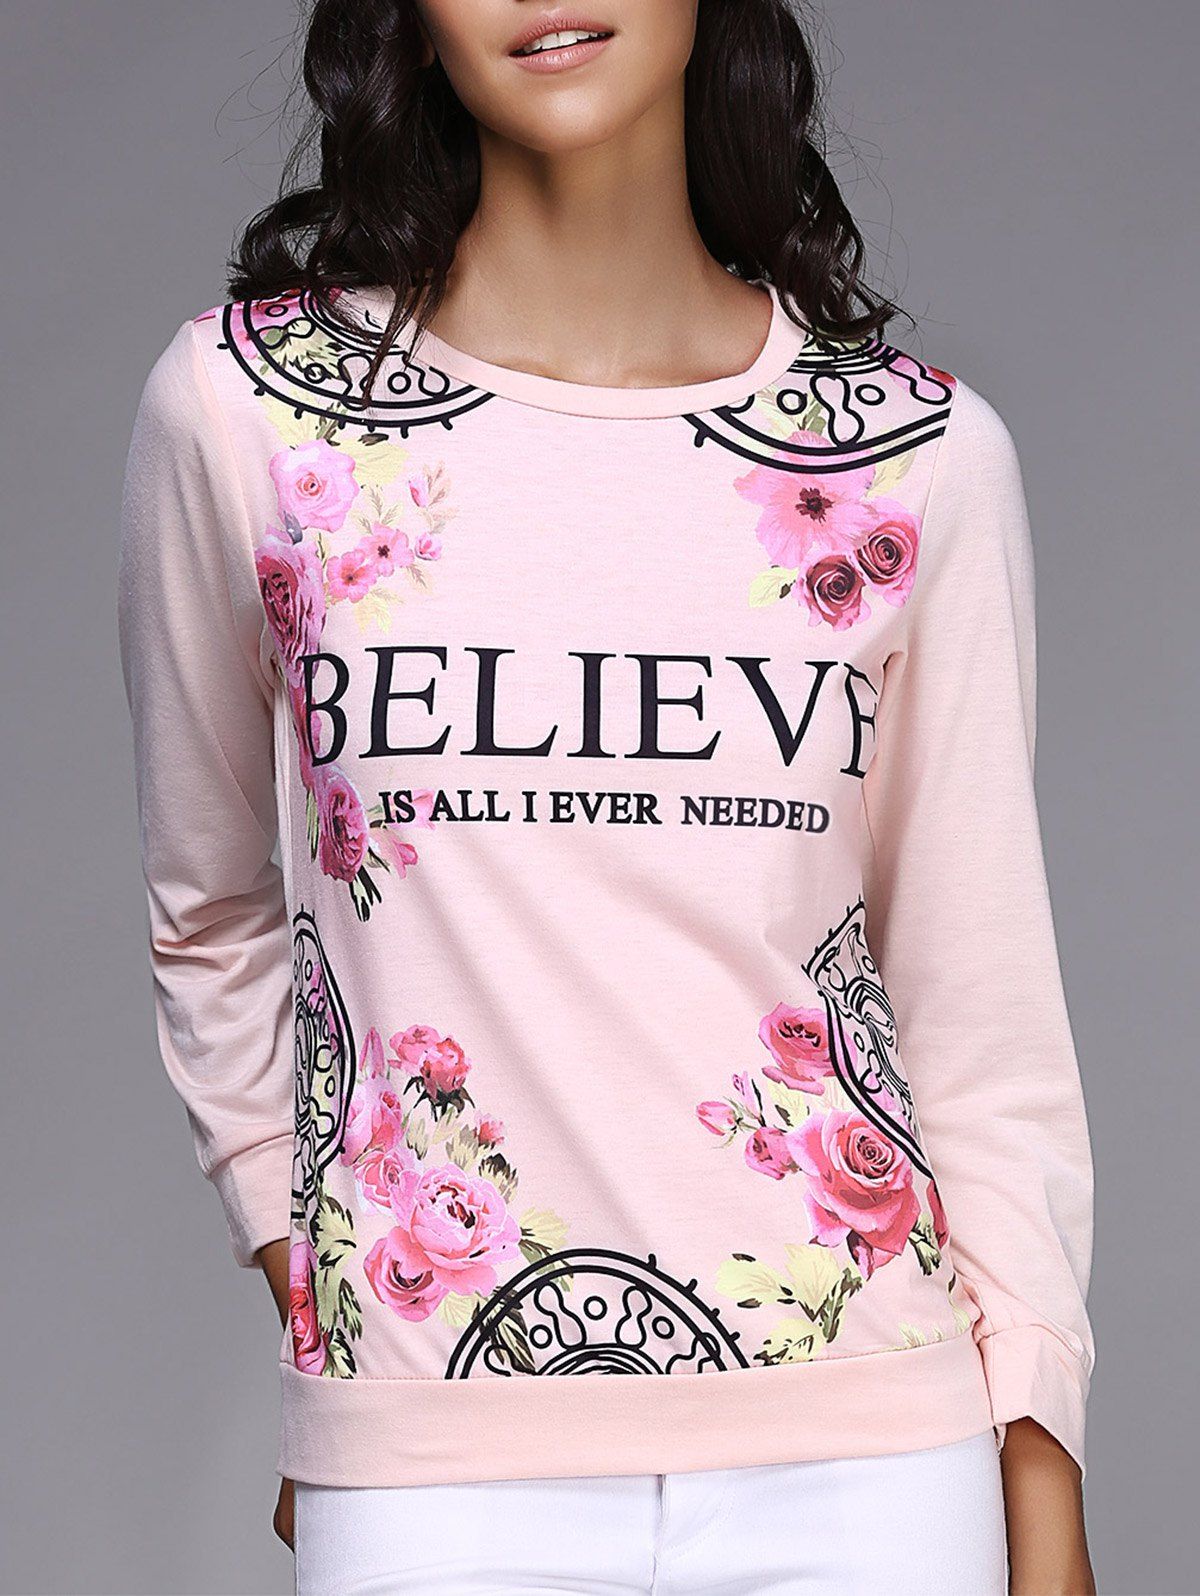 Casual Letter and Rose Printed Pullover Sweatshirt For Women - PINK M